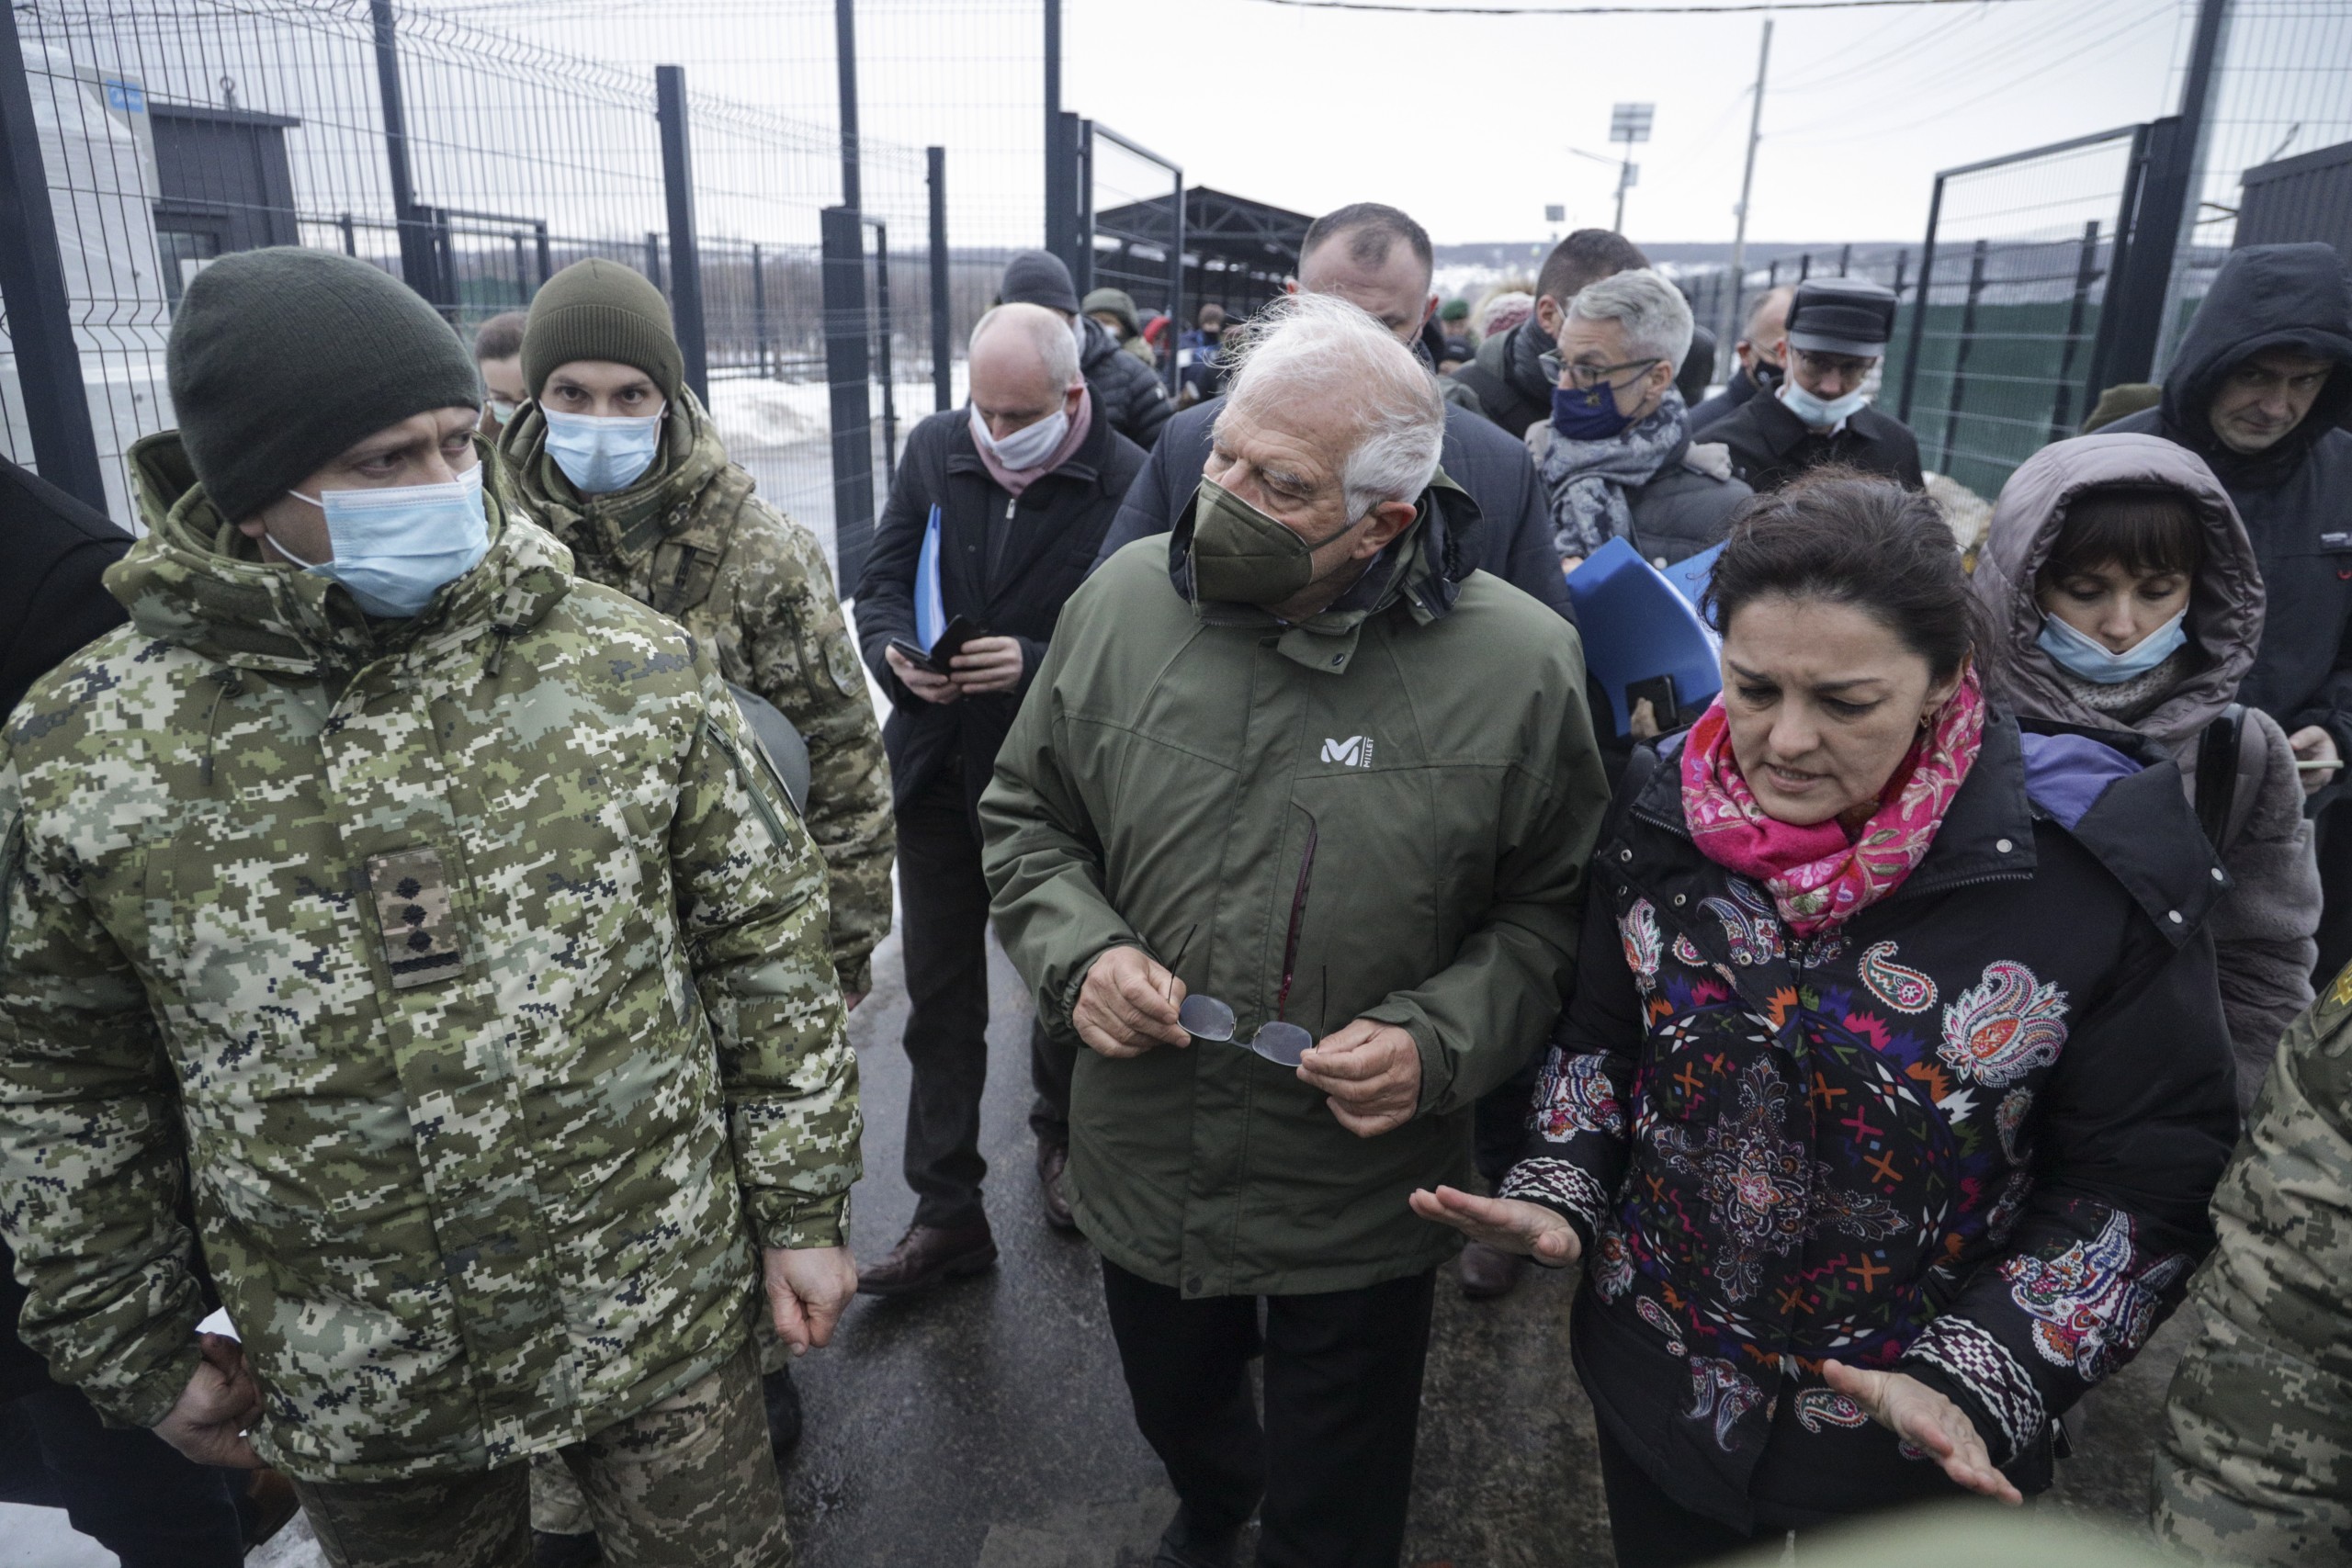 epa09667910 European Union foreign policy chief Josep Borrell (C) speaks with Ukrainian servicemen during his visit to the 'Stanitsa Luganskaya' border crossing between Ukraine and territory controlled by pro-Russian militants in the Luhansk area, Ukraine, 05 January 2022. Josep Borrell, High Representative of the European Union for Foreign Affairs and Security Policy, together with Ukrainian Foreign Minister Dmytro Kuleba visit the war zone in Eastern Ukraine amid increasing Russian military power on the Ukraine-Russian border.  EPA/STANISLAV KOZLIUK